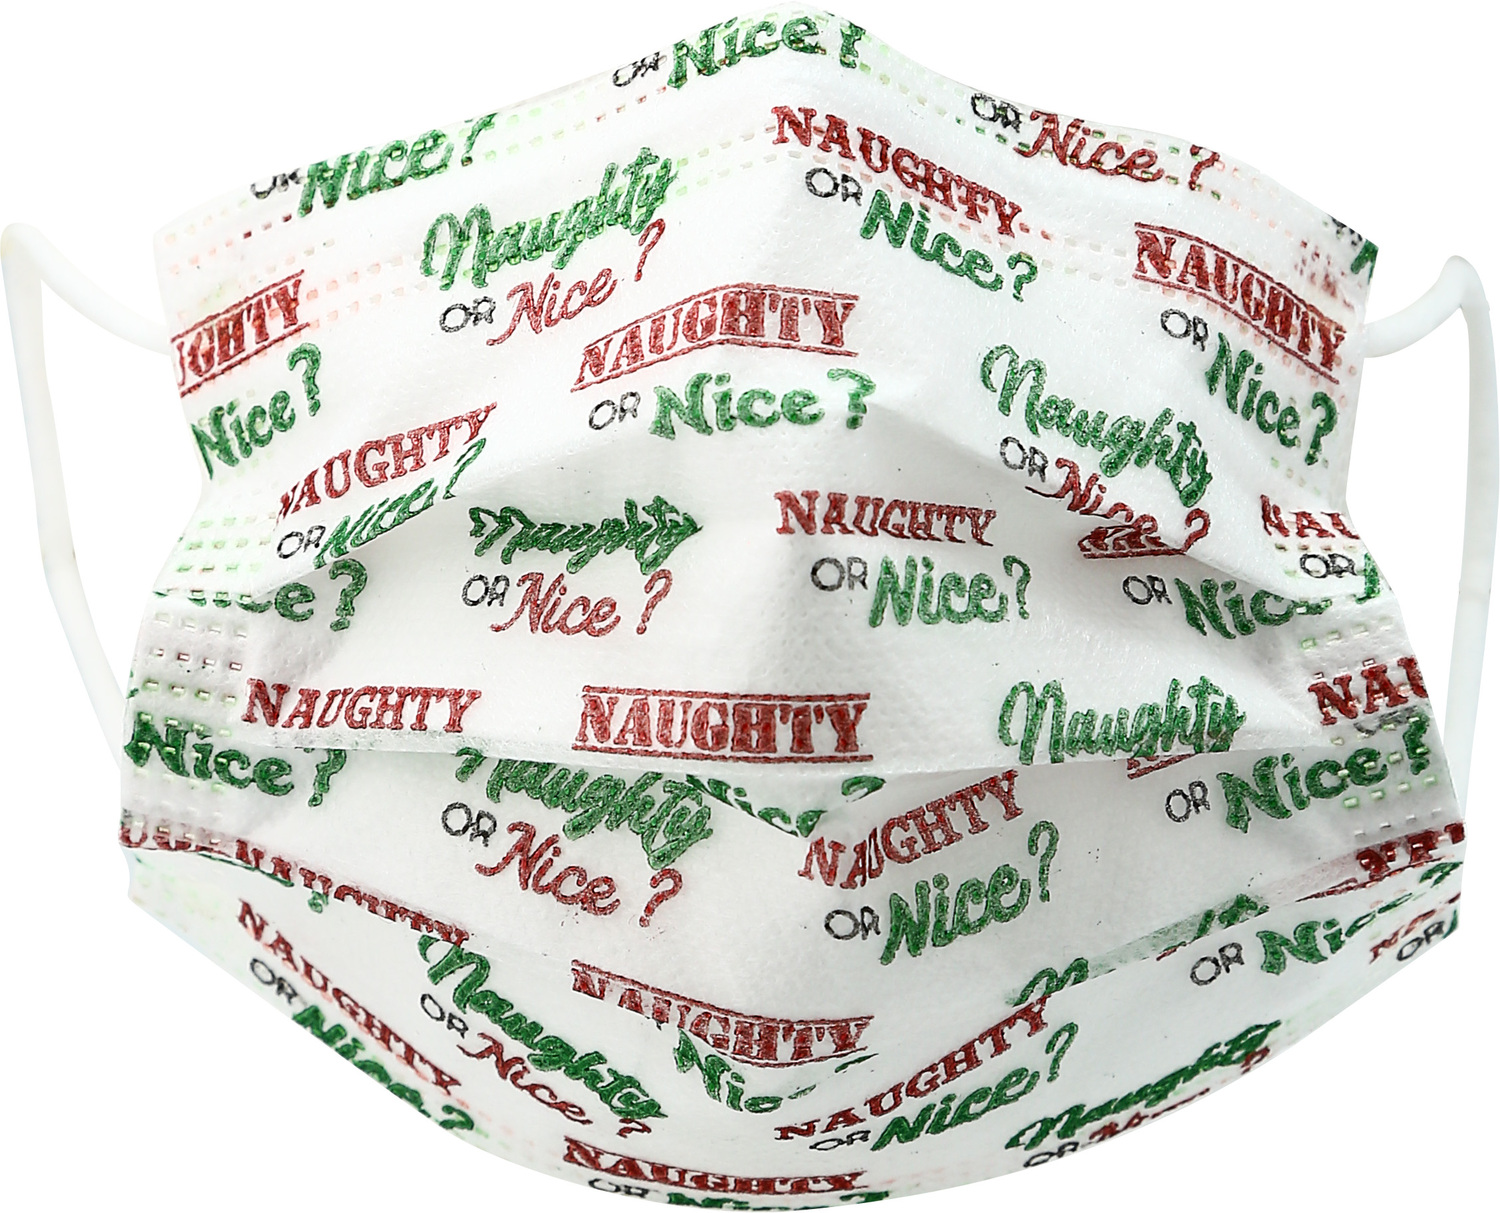 Naughty or Nice? by Pavilion Cares - Naughty or Nice? - Kid's Disposable 3-Layer Face Mask
(Set of 7)